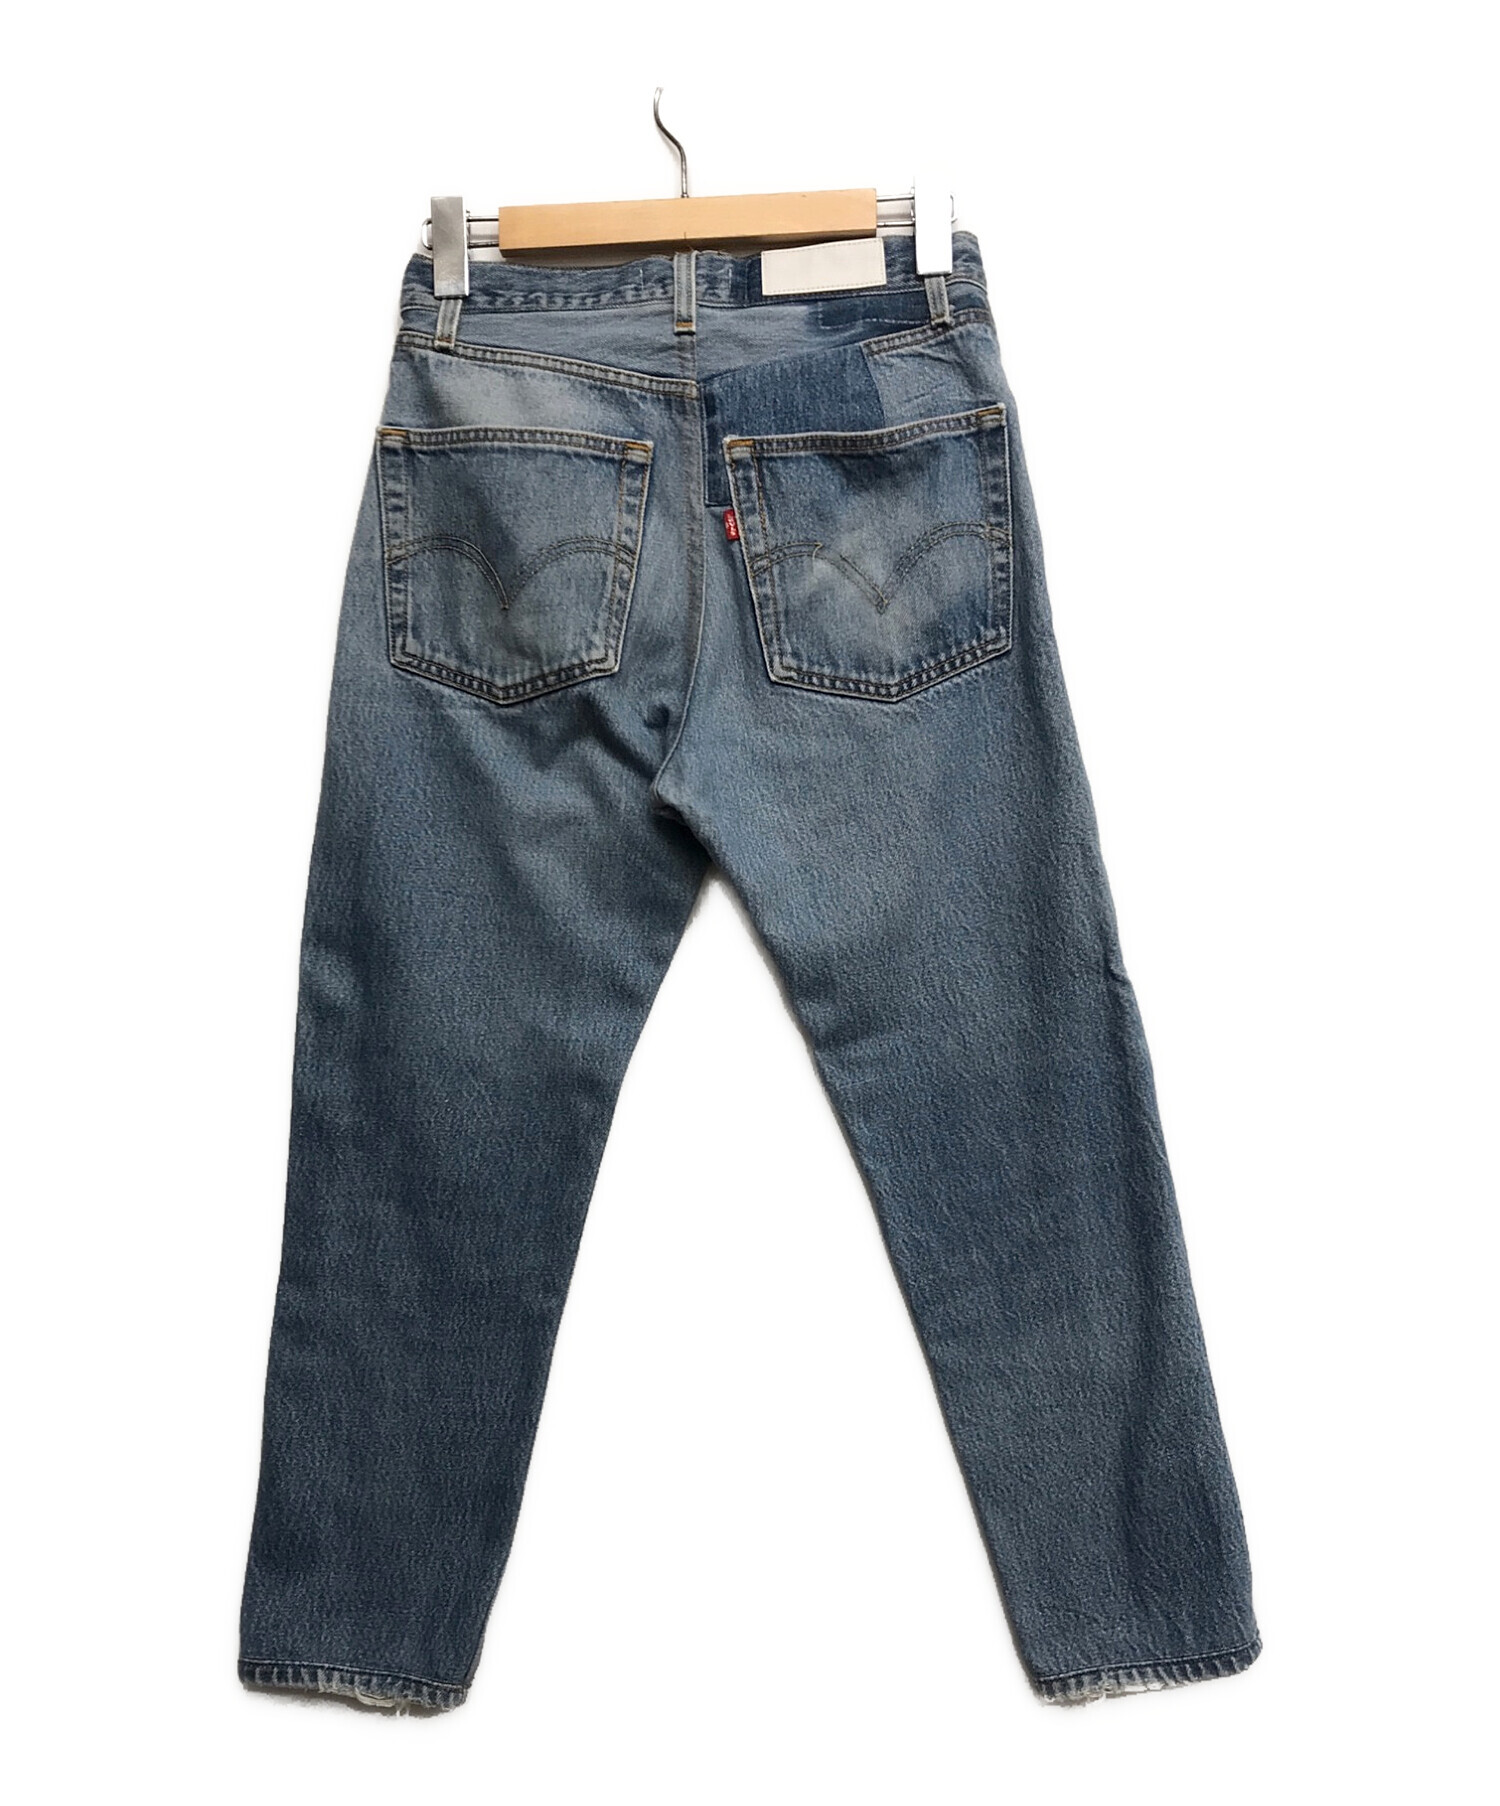 RE/DONE LEVI'S コラボデニム | camillevieraservices.com